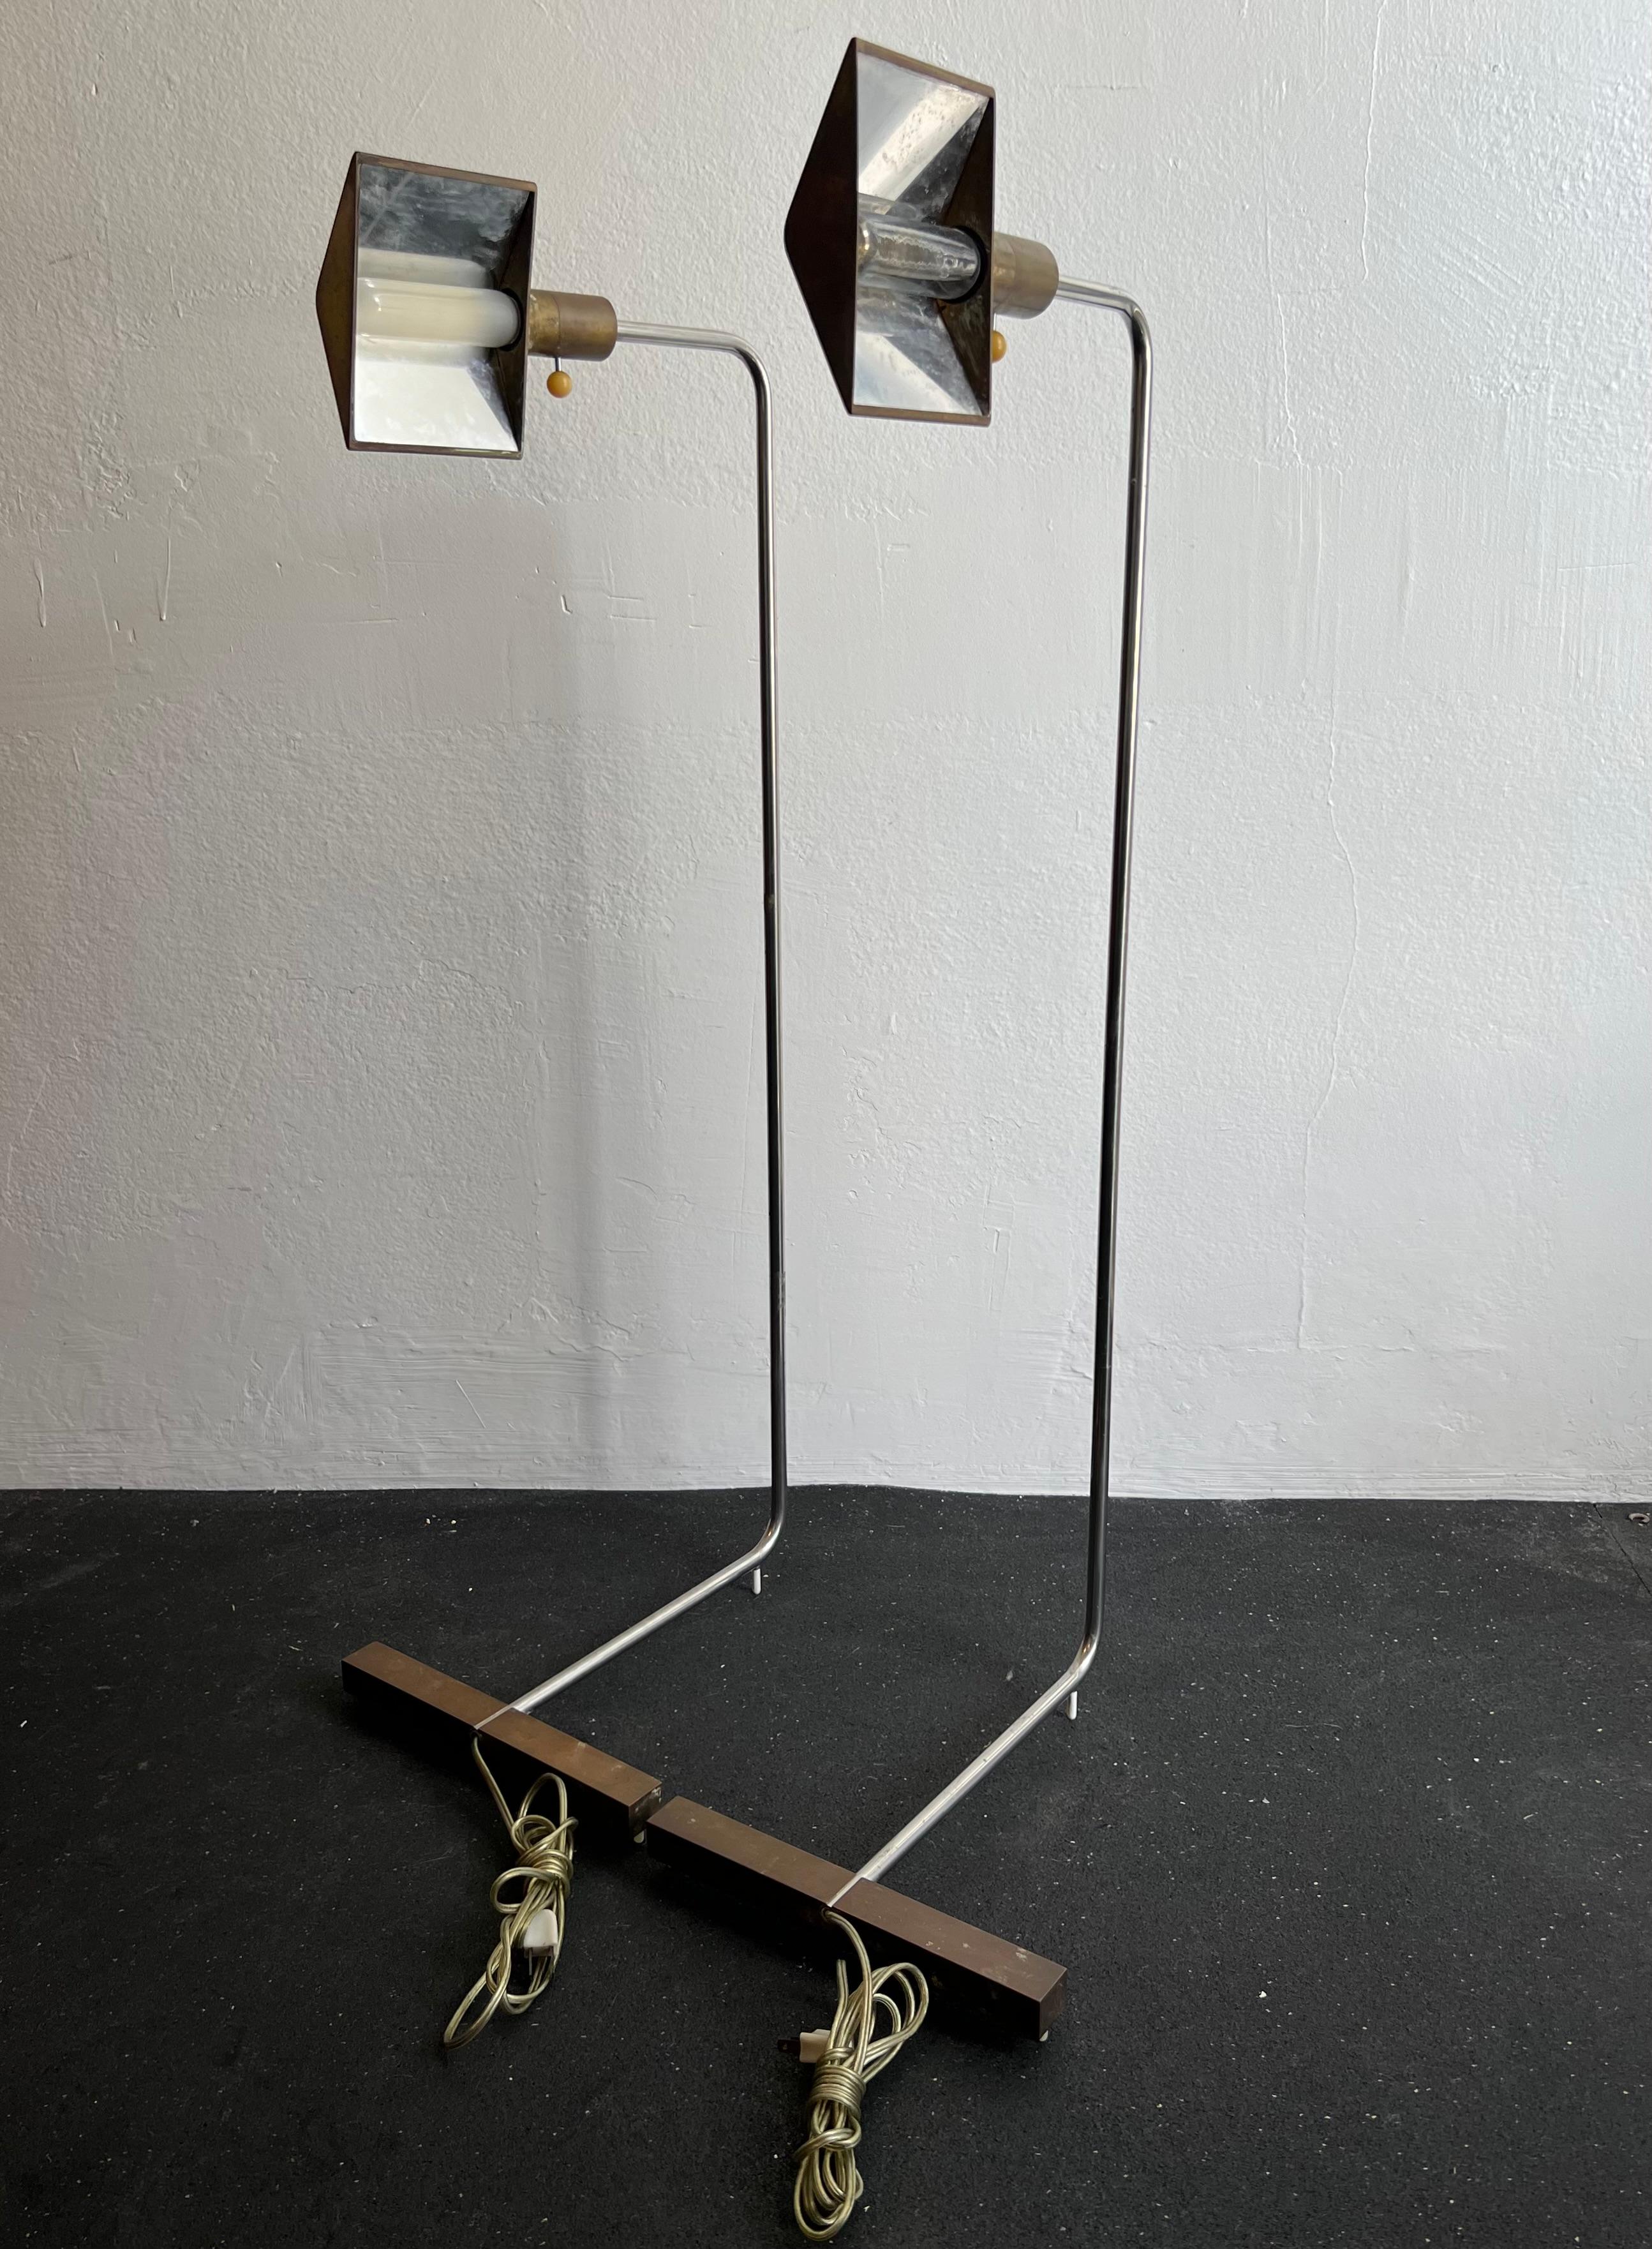 Pair of early 1MUWV Cedric Hartman floor lamps. No apparent markings. Brass and polished aluminum/chrome finishes. Patination throughout, unpolished (please refer to photos). Original wiring/hardware found in working condition. Additional photos